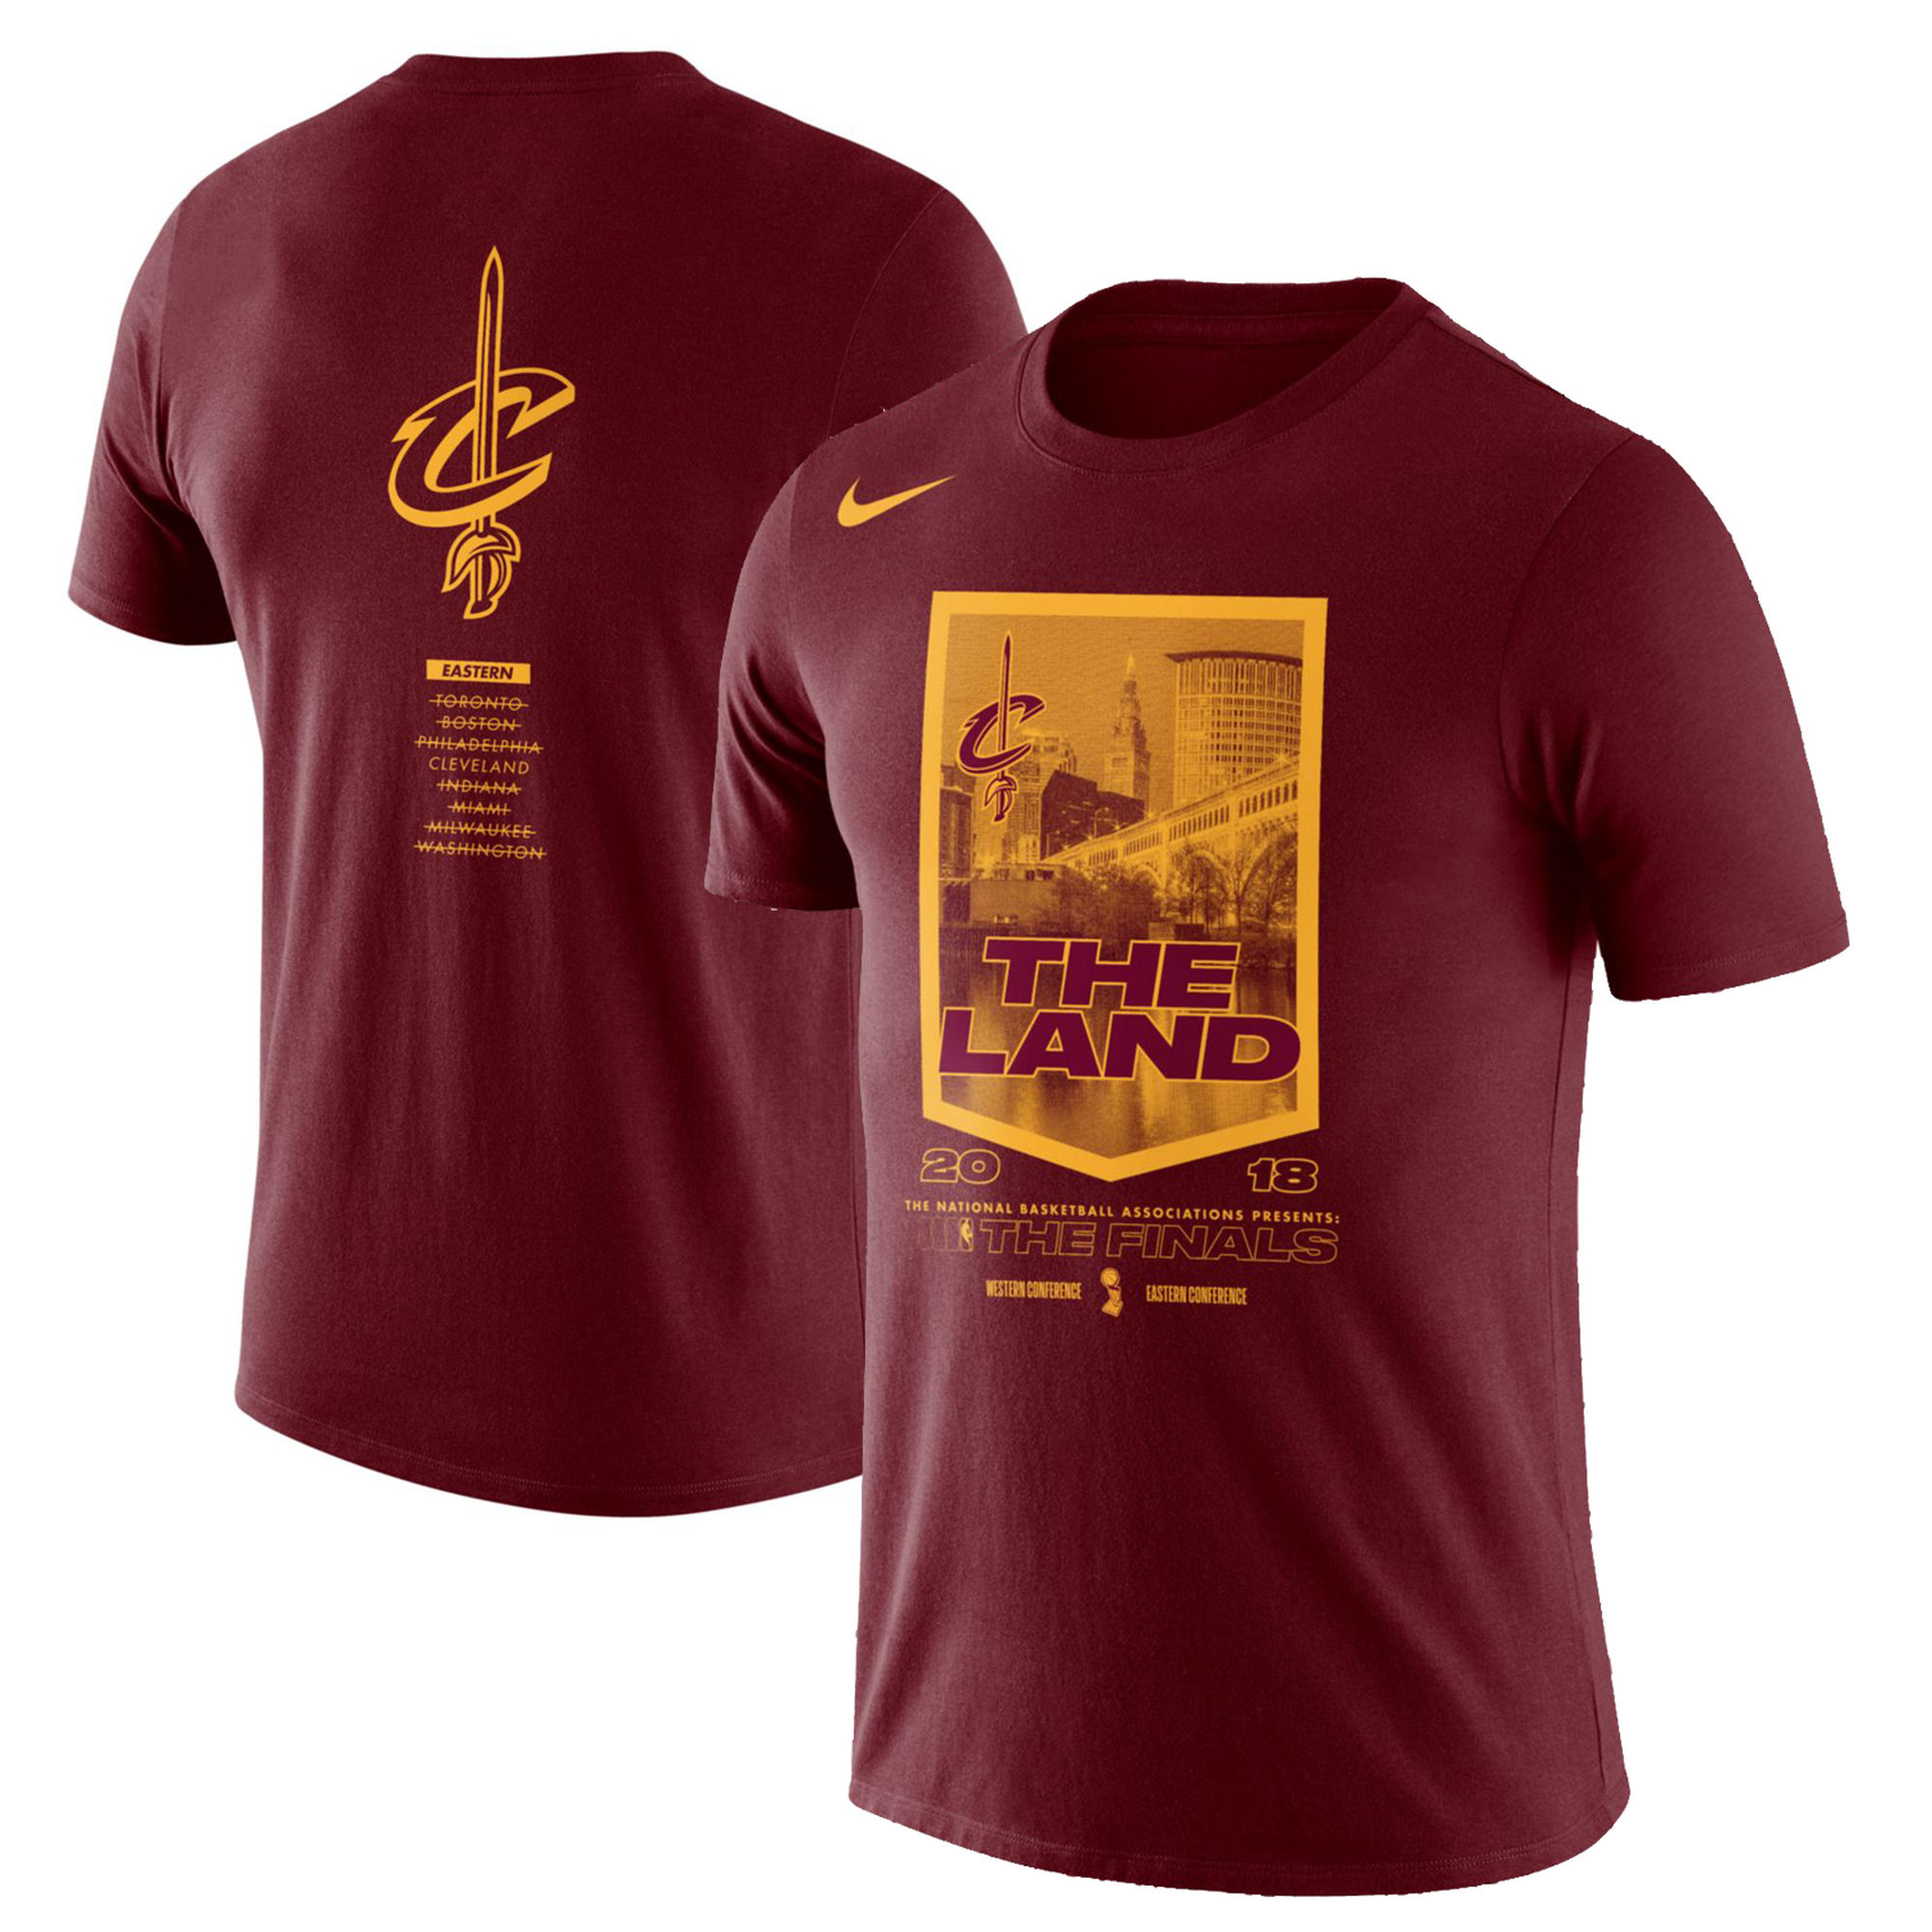 Cleveland Cavaliers Nike 2018 NBA Finals Bound City DNA Cotton Performance T-Shirt Red